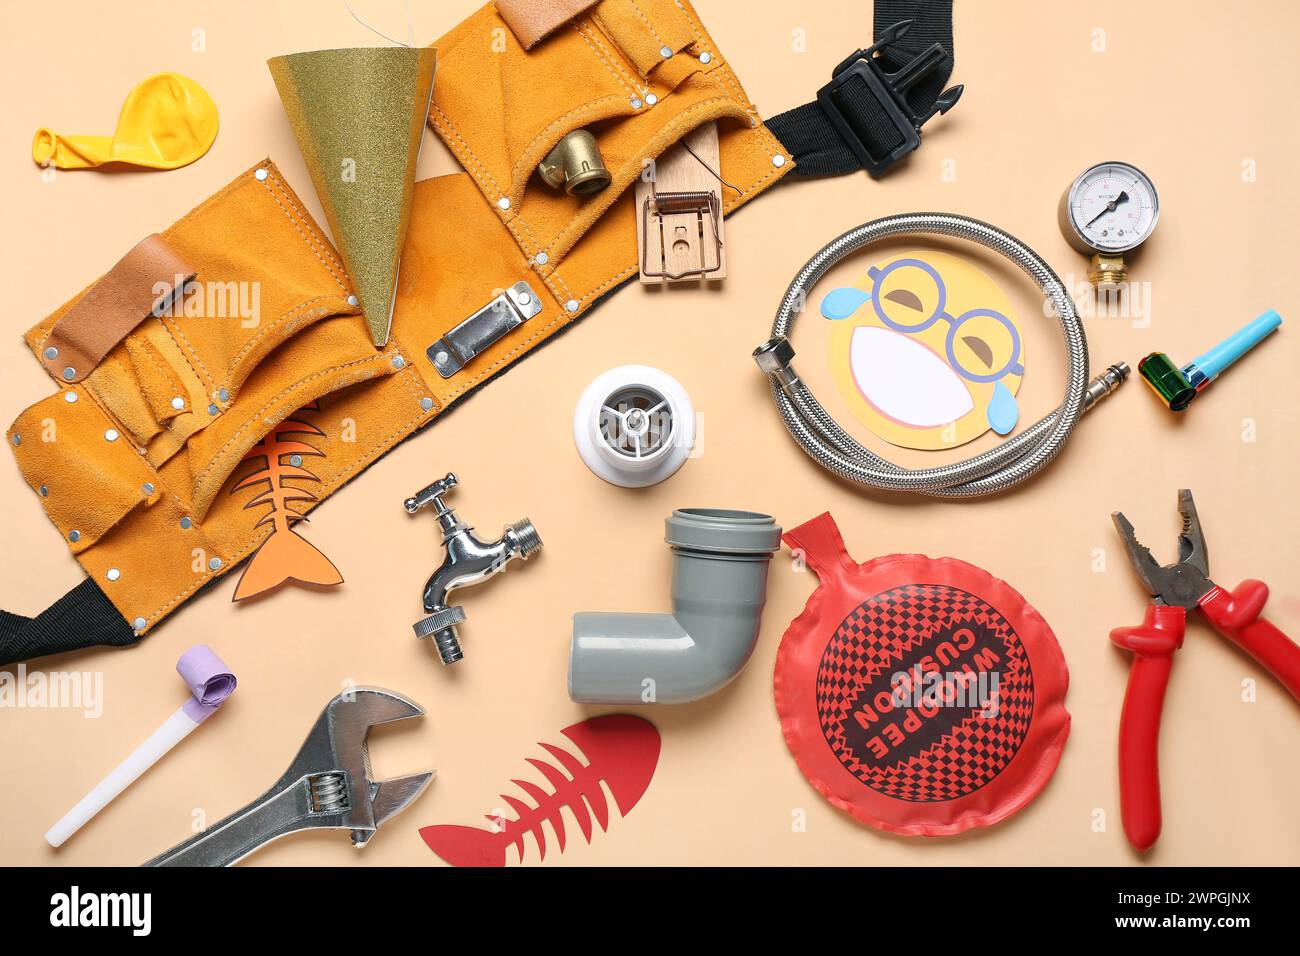 Construction tools with whoopee cushion, mousetrap and party decor on beige background. April Fools Day Stock Photo